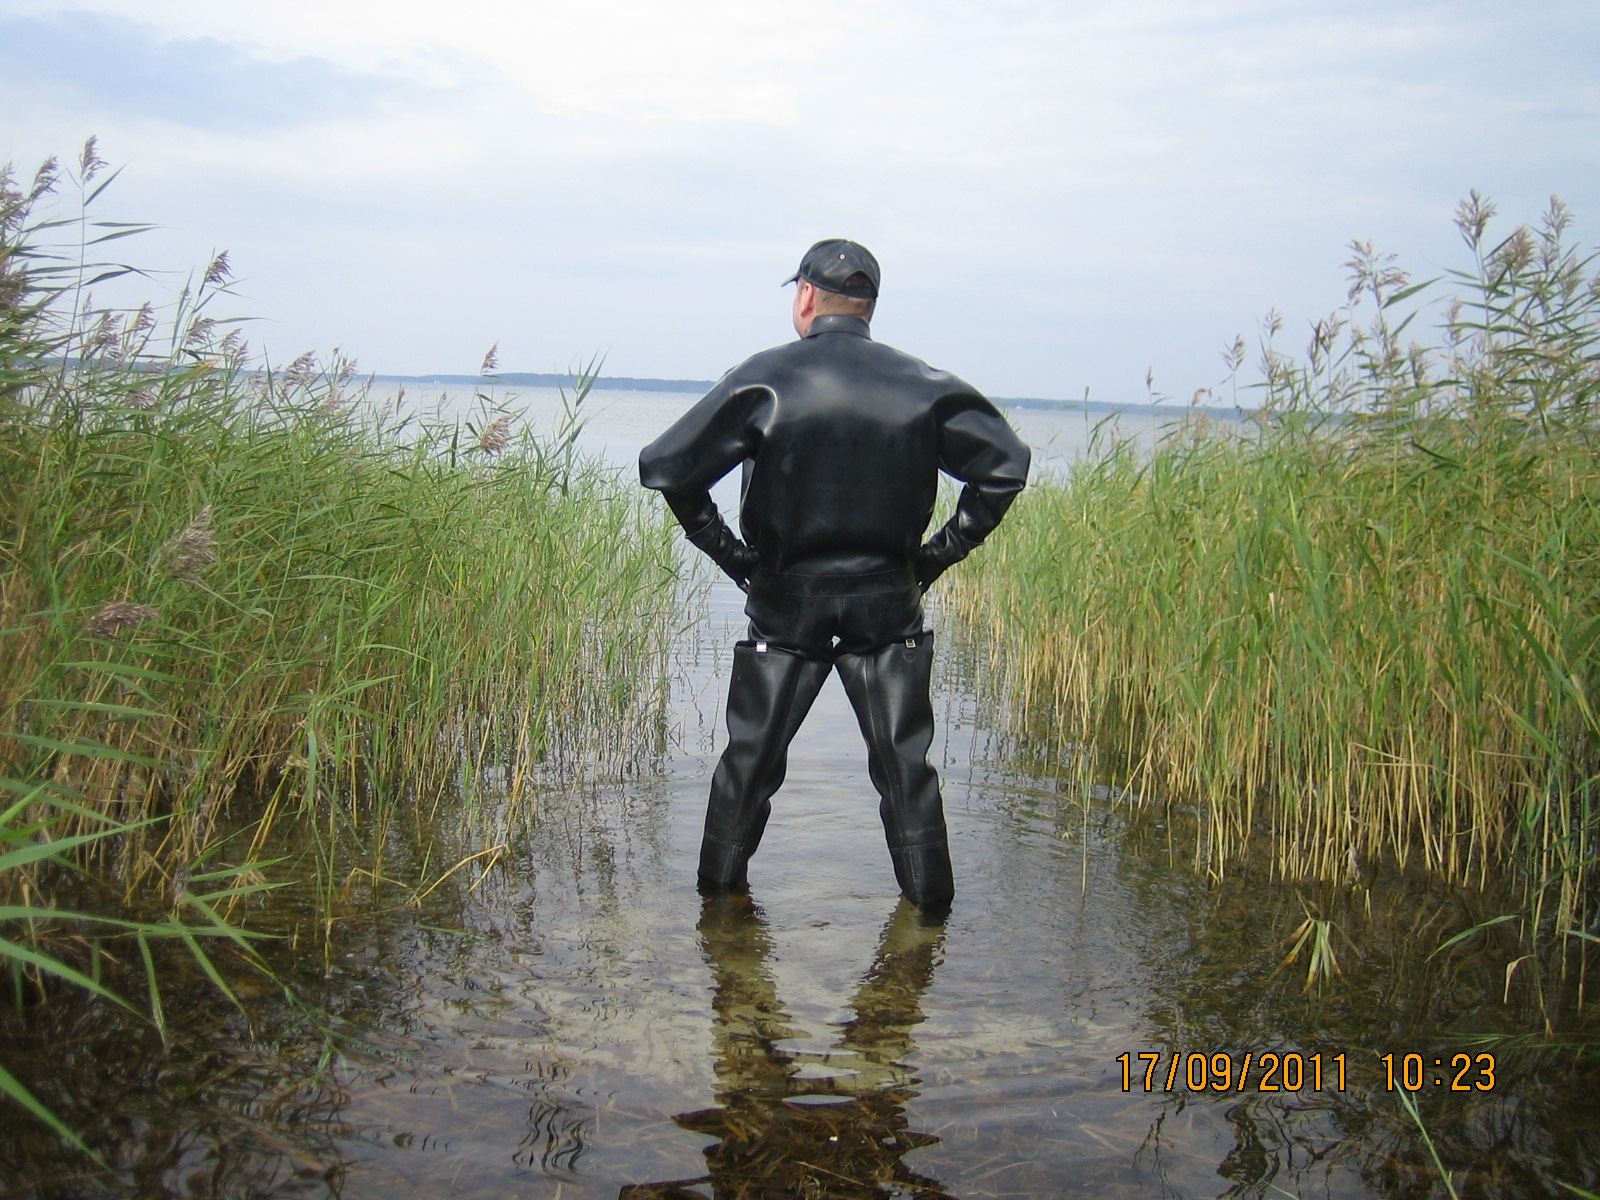 full rubber and of course: WADERS